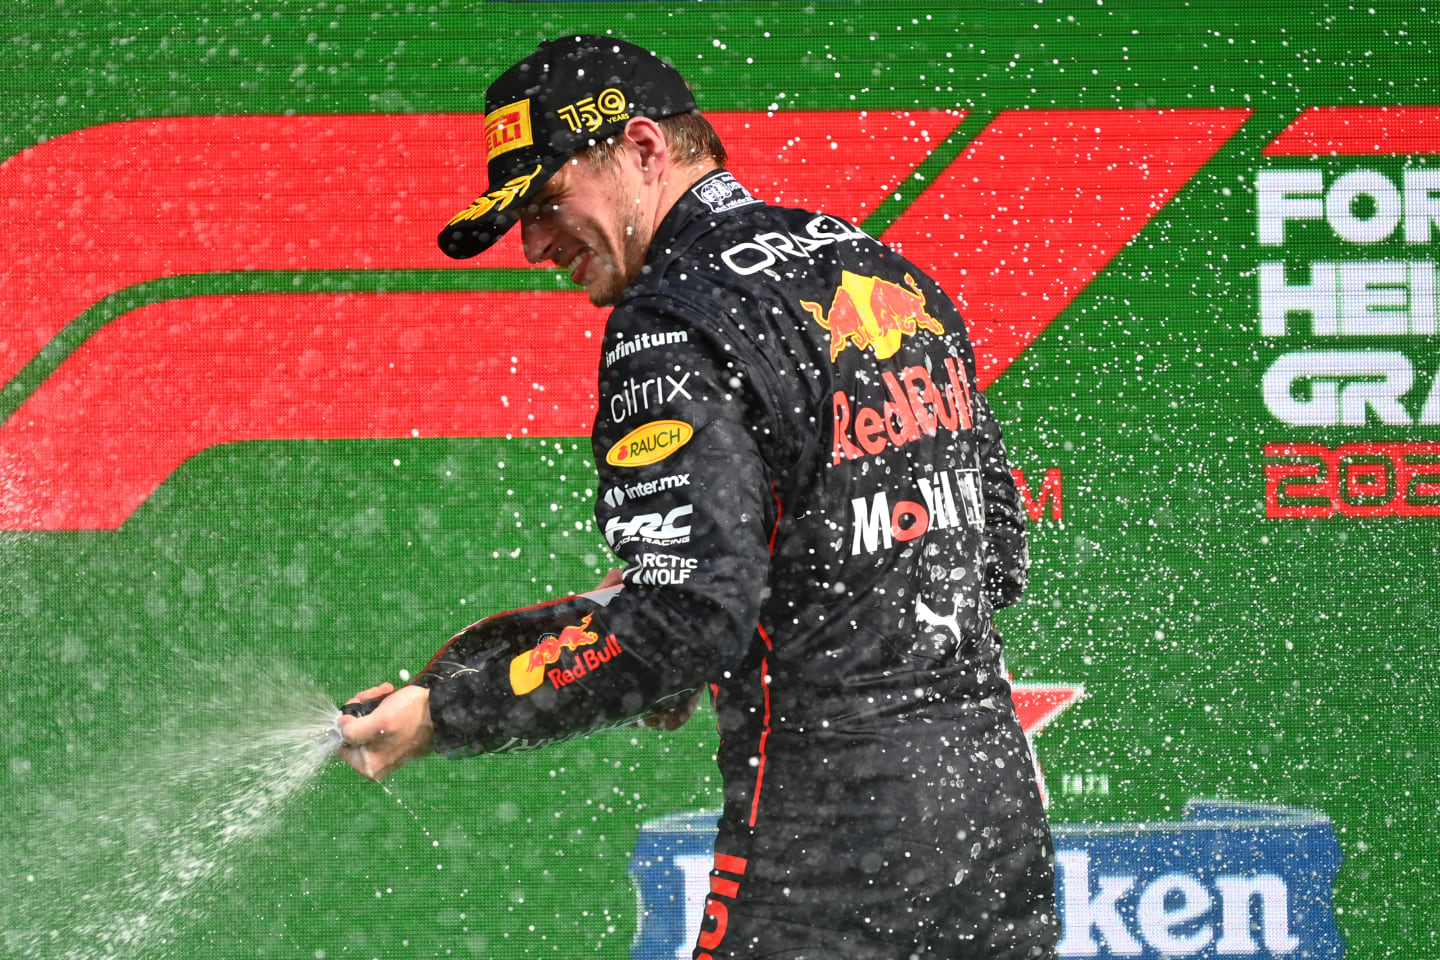 ZANDVOORT, NETHERLANDS - SEPTEMBER 04: Race winner Max Verstappen of the Netherlands and Oracle Red Bull Racing celebrates on the podium during the F1 Grand Prix of The Netherlands at Circuit Zandvoort on September 04, 2022 in Zandvoort, Netherlands. (Photo by Dan Mullan/Getty Images)